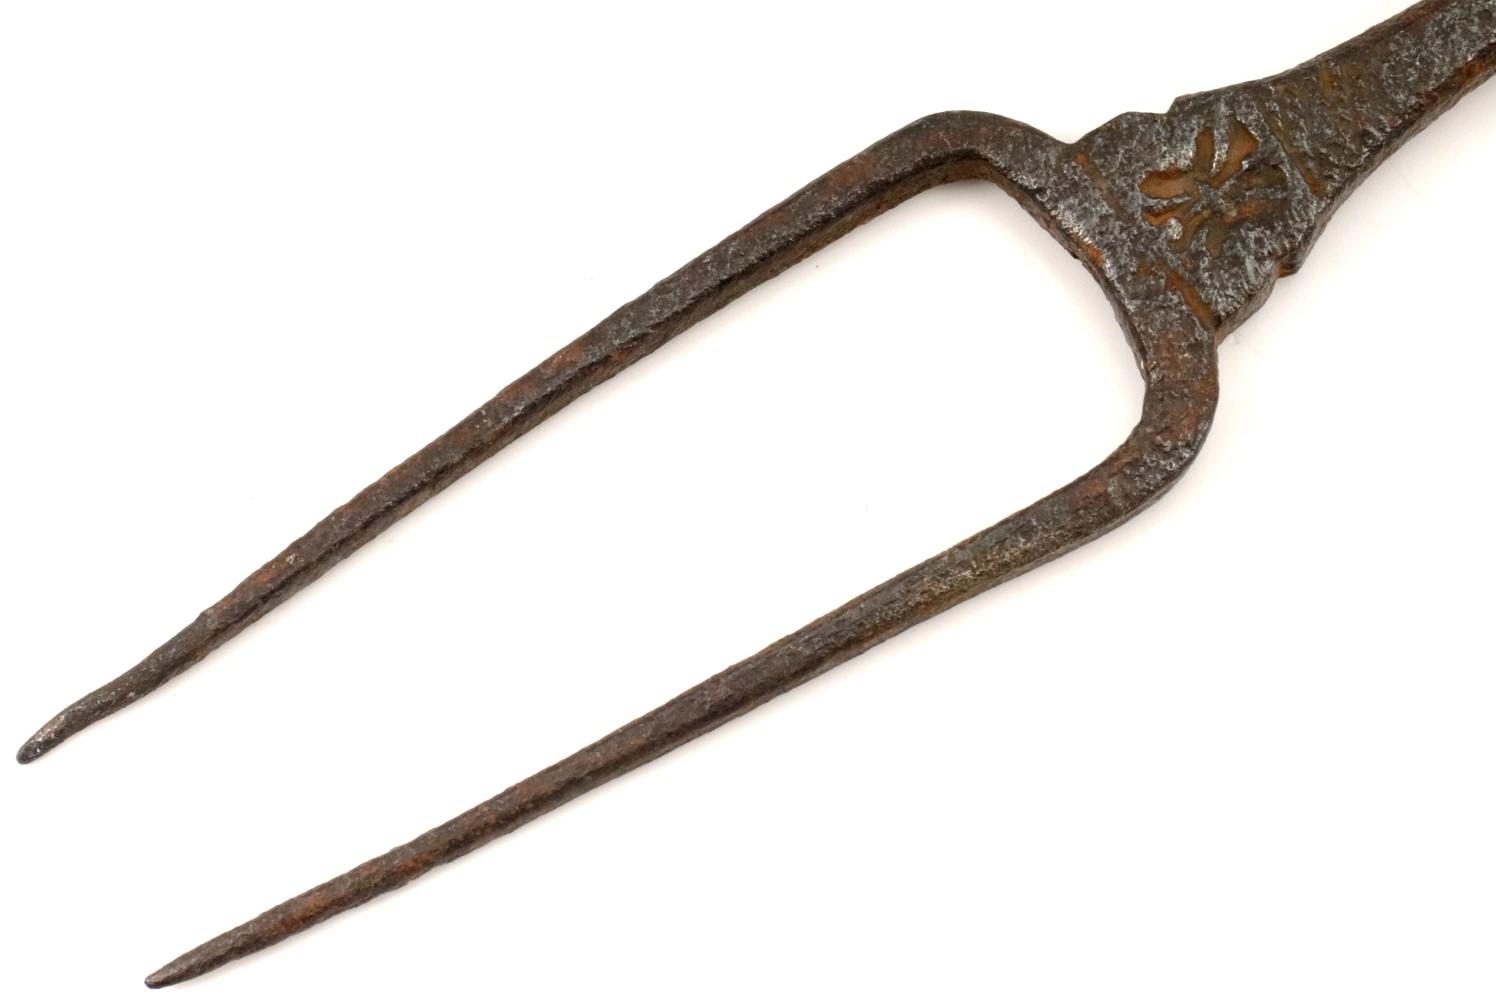 Very Cool Medieval Era Large Iron Meat Fork with Early Struck Maker's Mark. Probably English French or German, very well forged with Twisted.